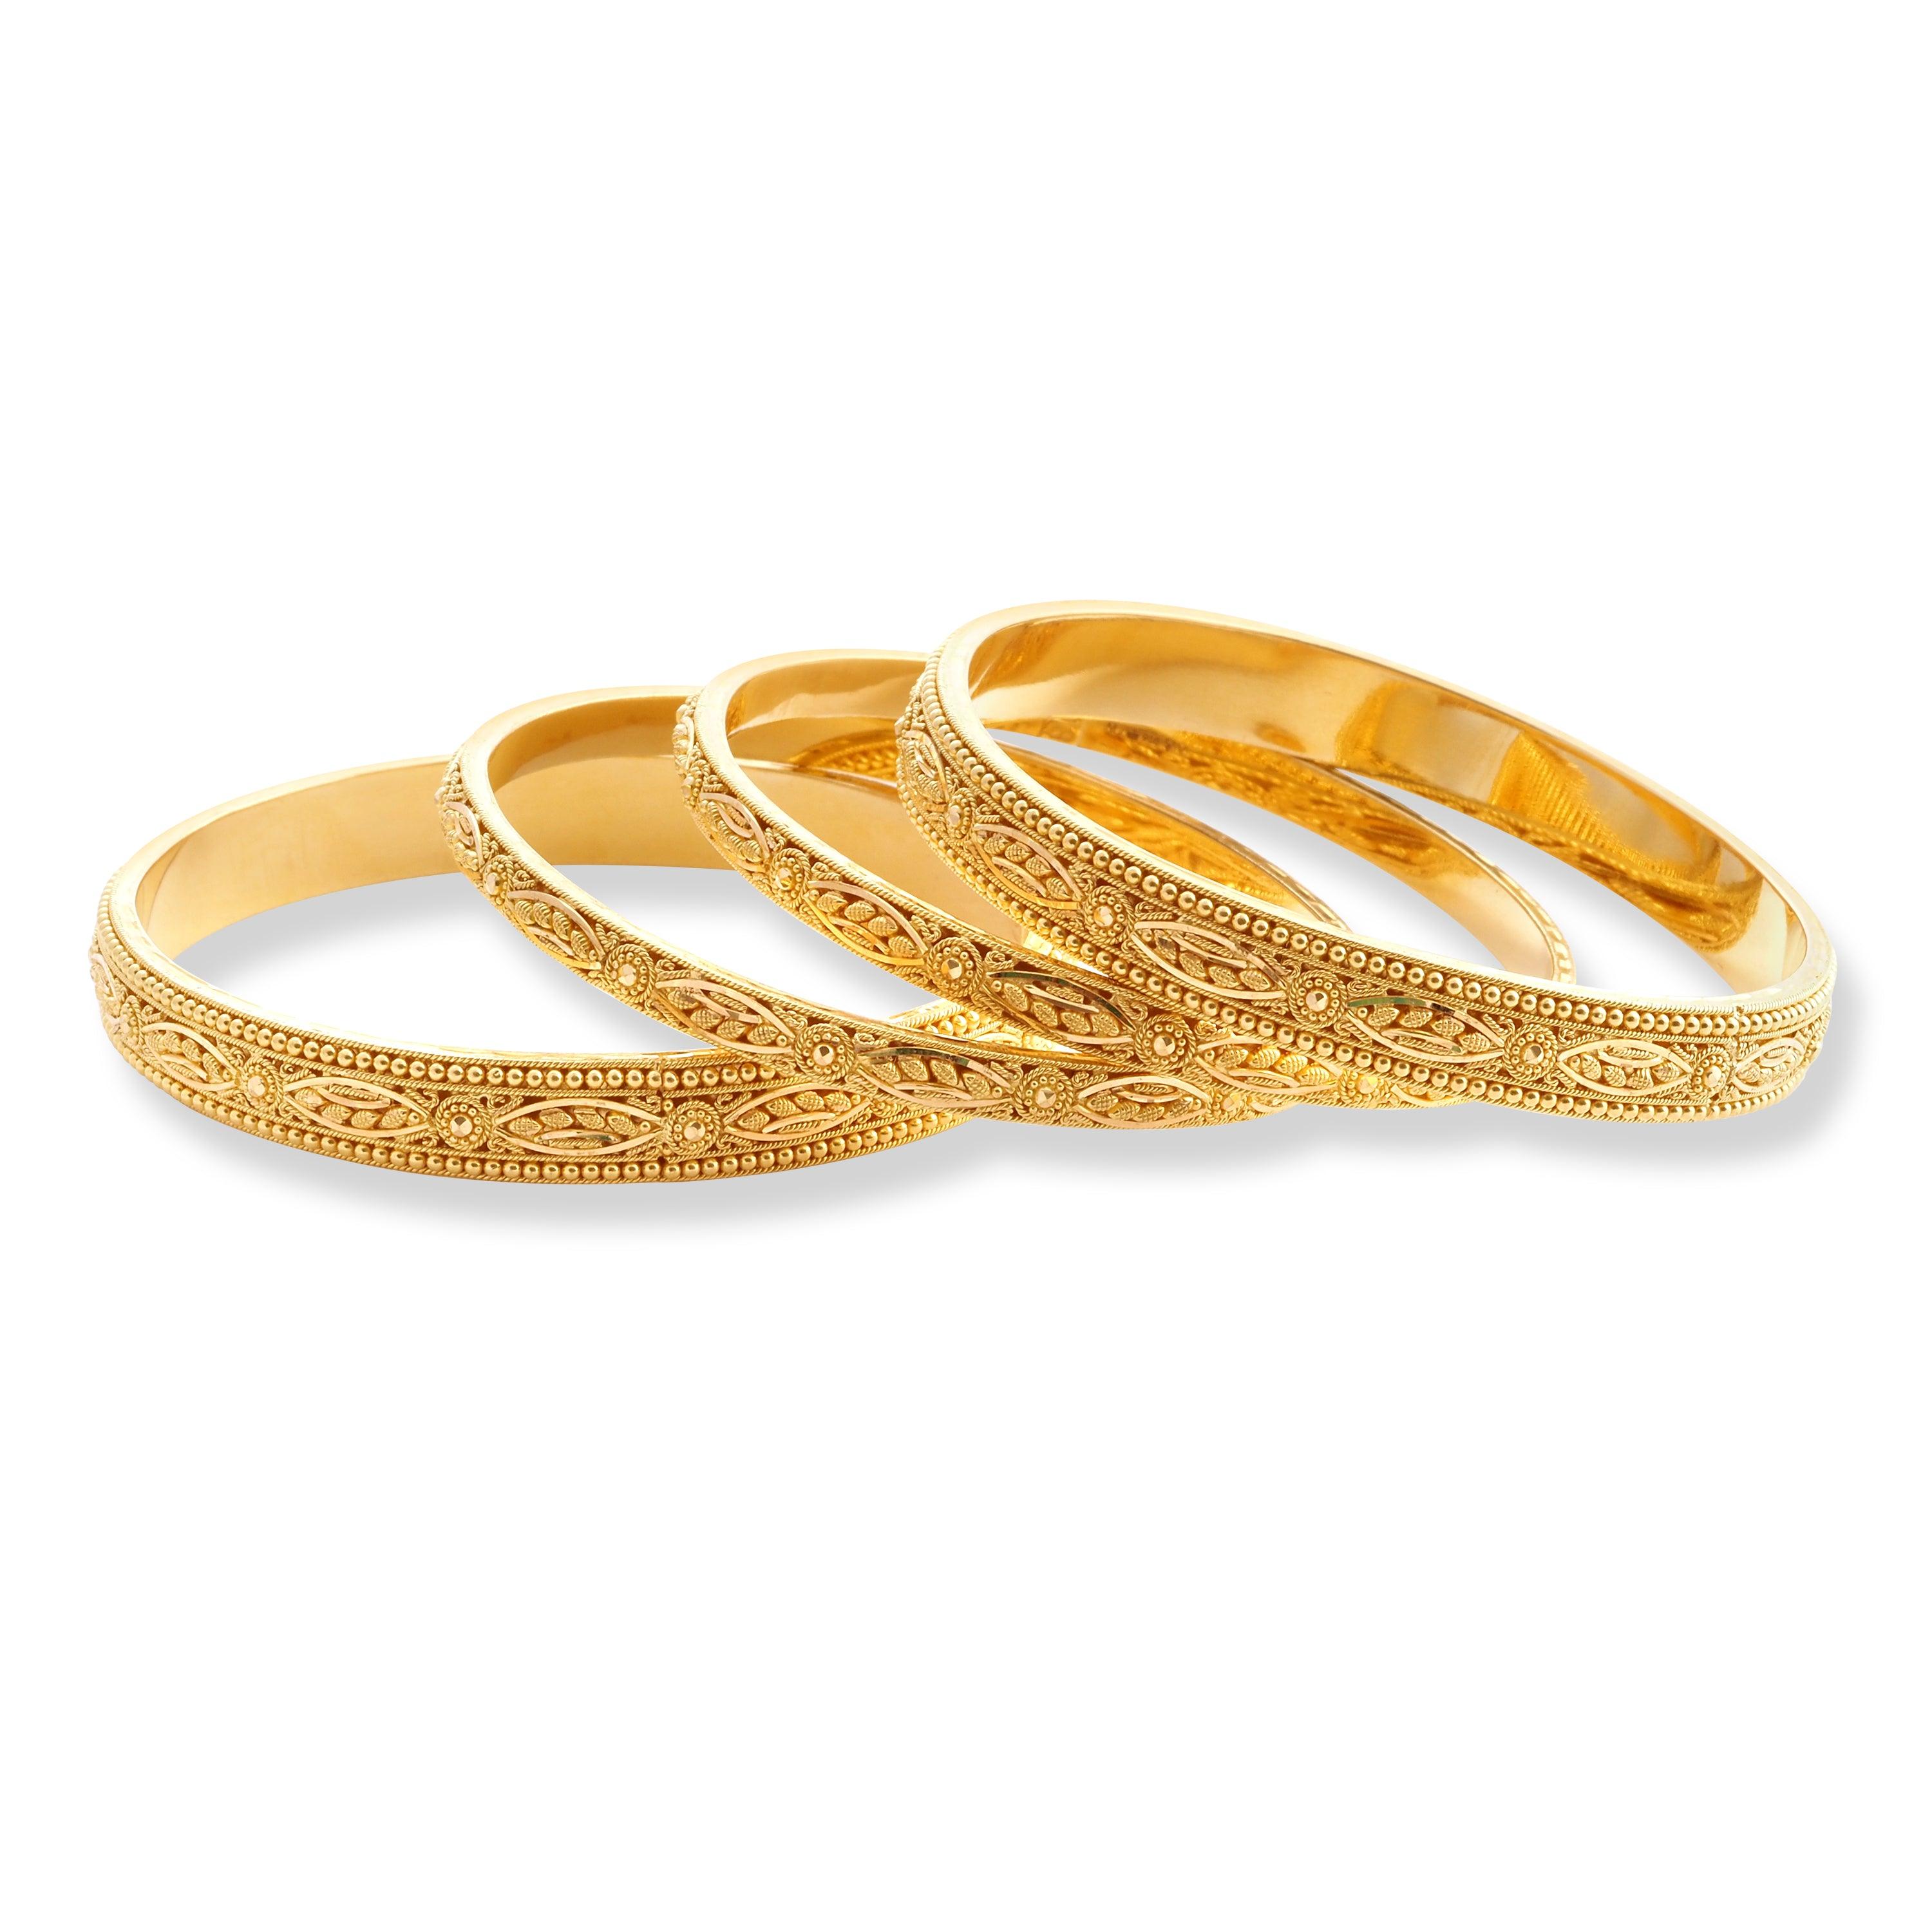 Set of Four 22ct Gold Bangles with Flower Design and Filigree Work B-8063 - Minar Jewellers